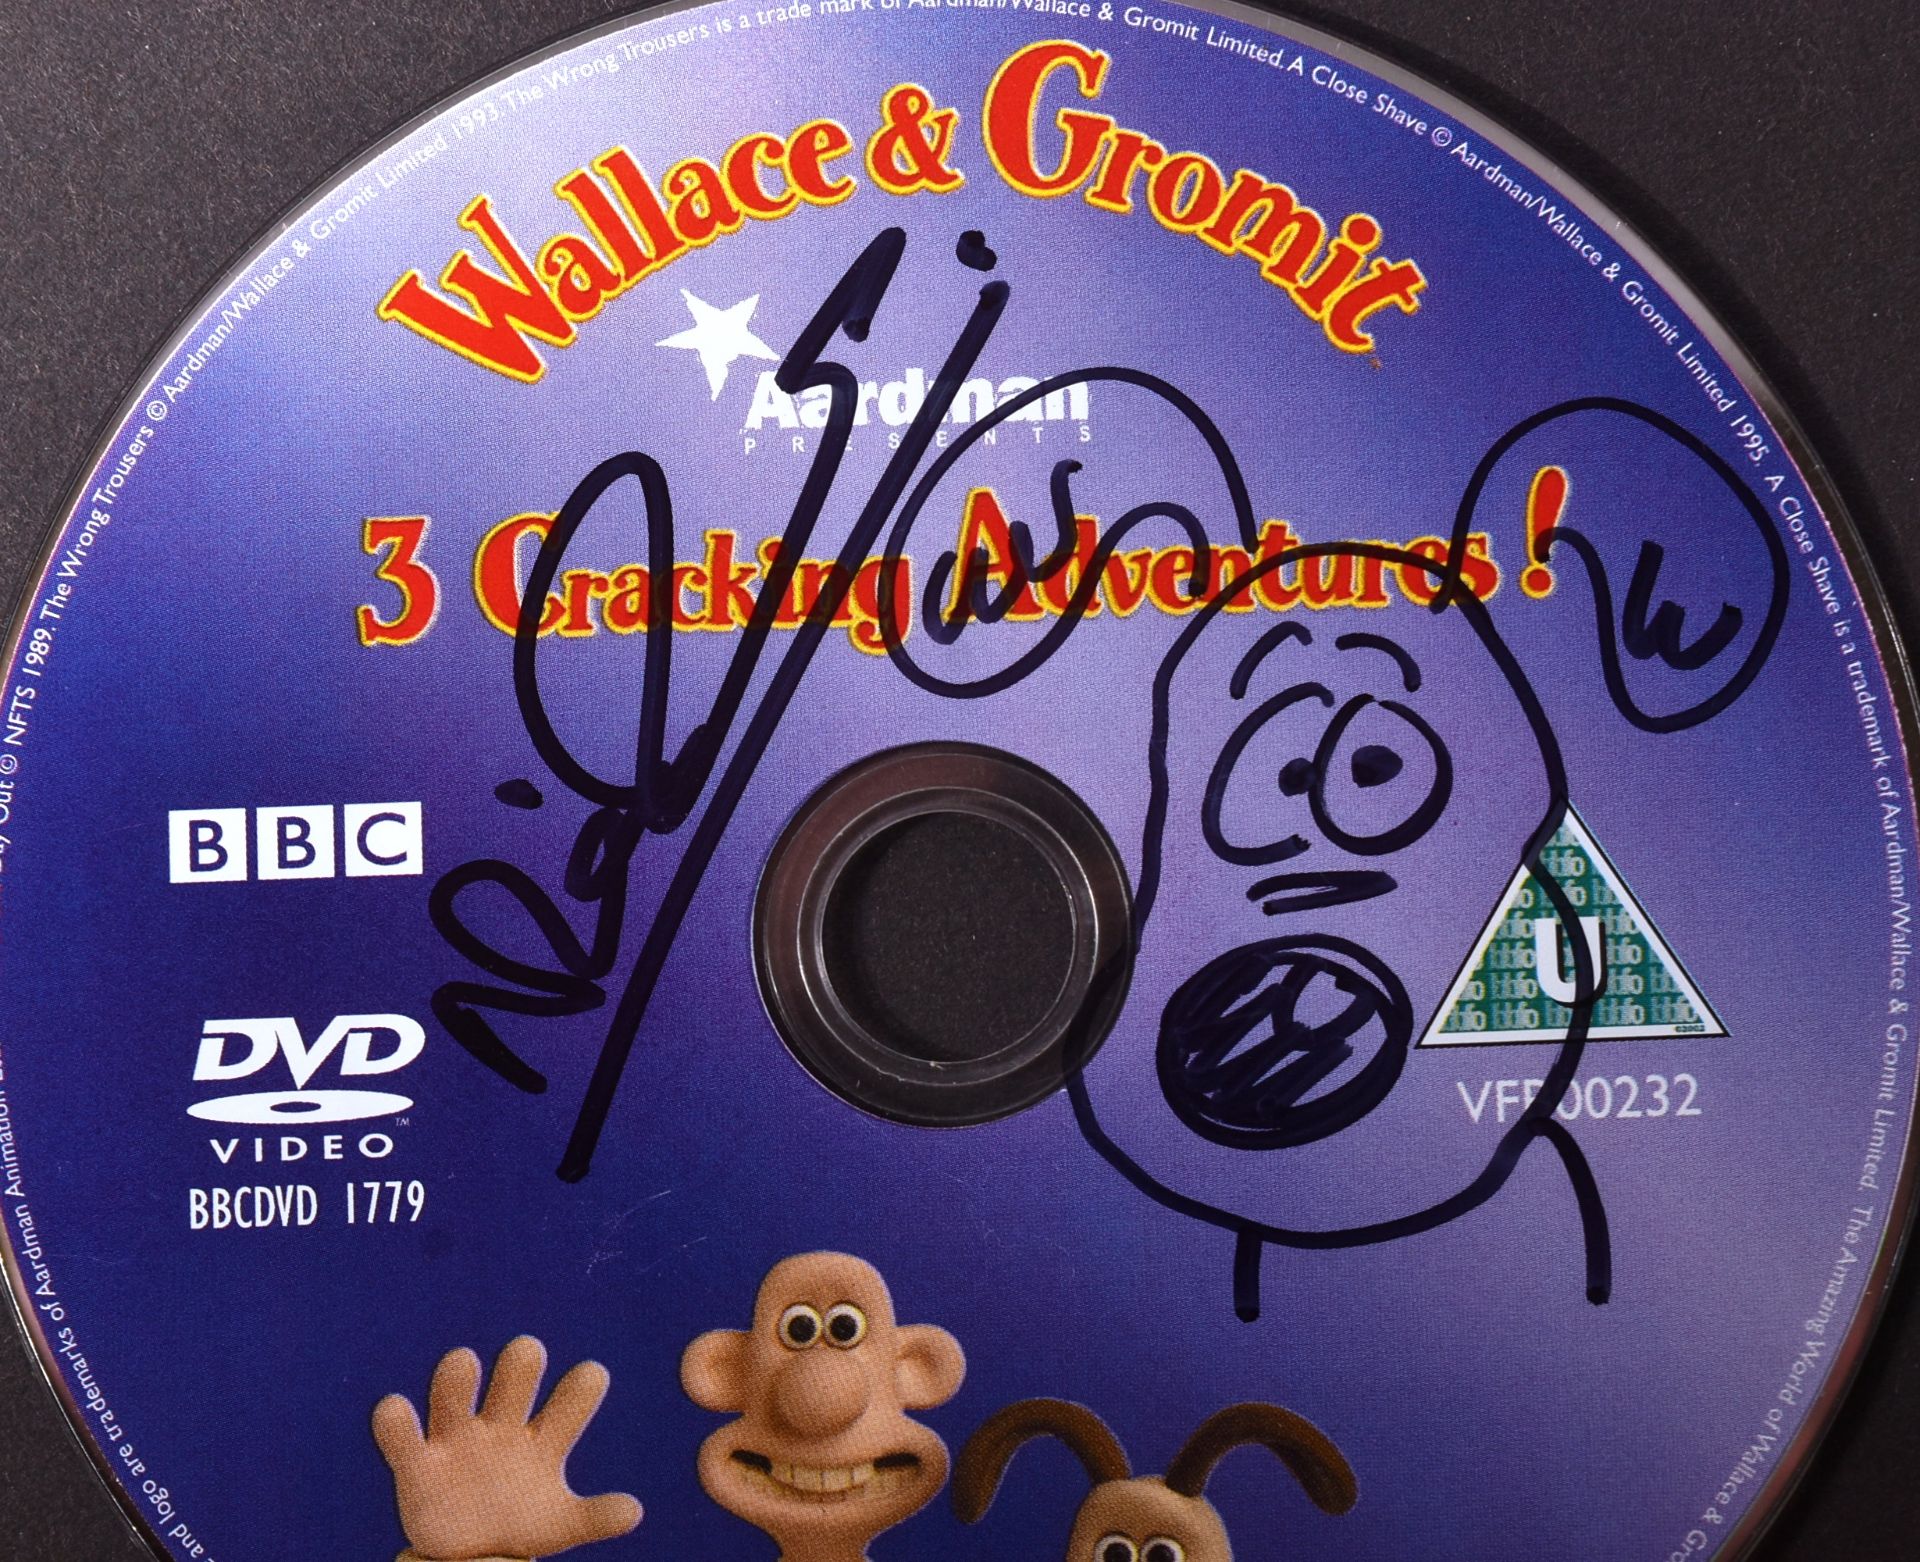 WALLACE & GROMIT - ORIGINAL TRILOGY - SIGNED DVD WITH SKETCH - Image 2 of 2